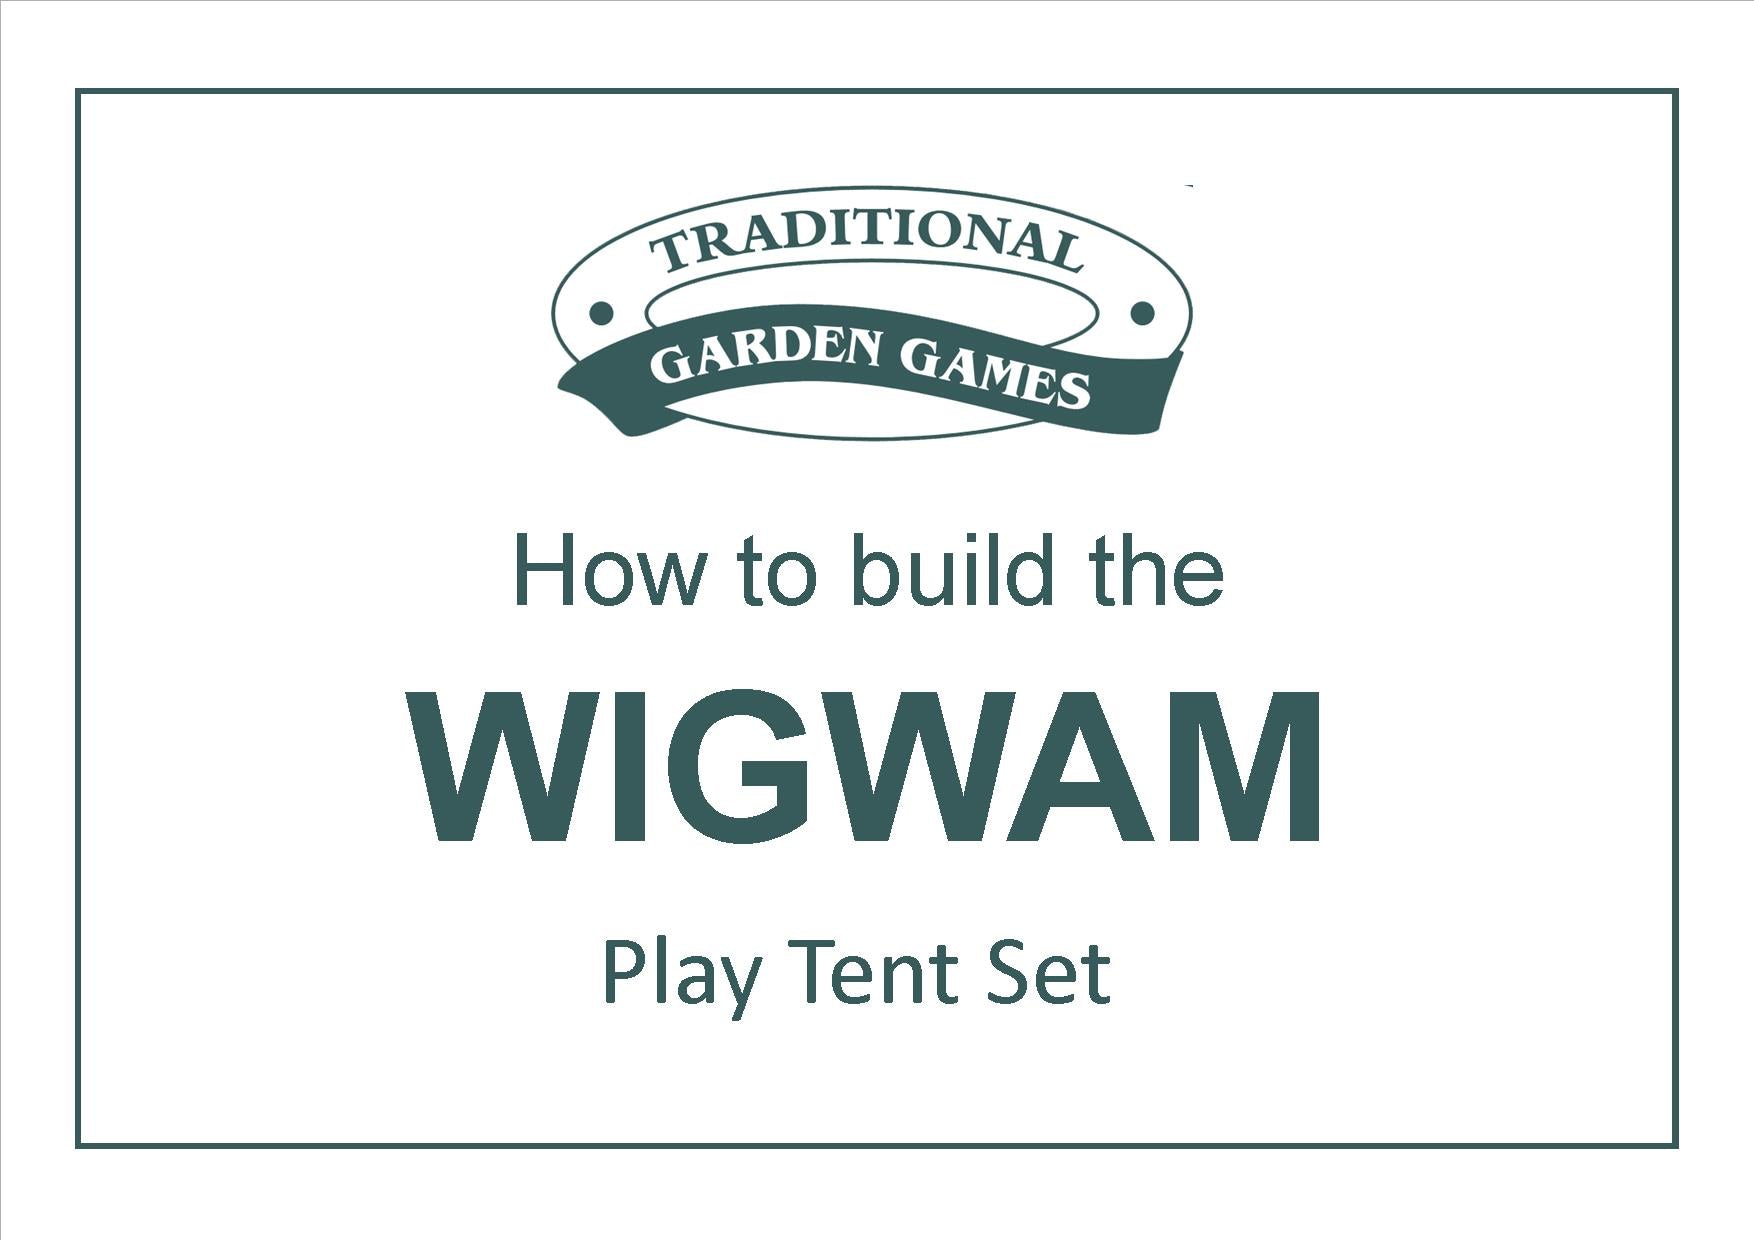 How to build the Traditional Garden Games WIGWAM Play Tent